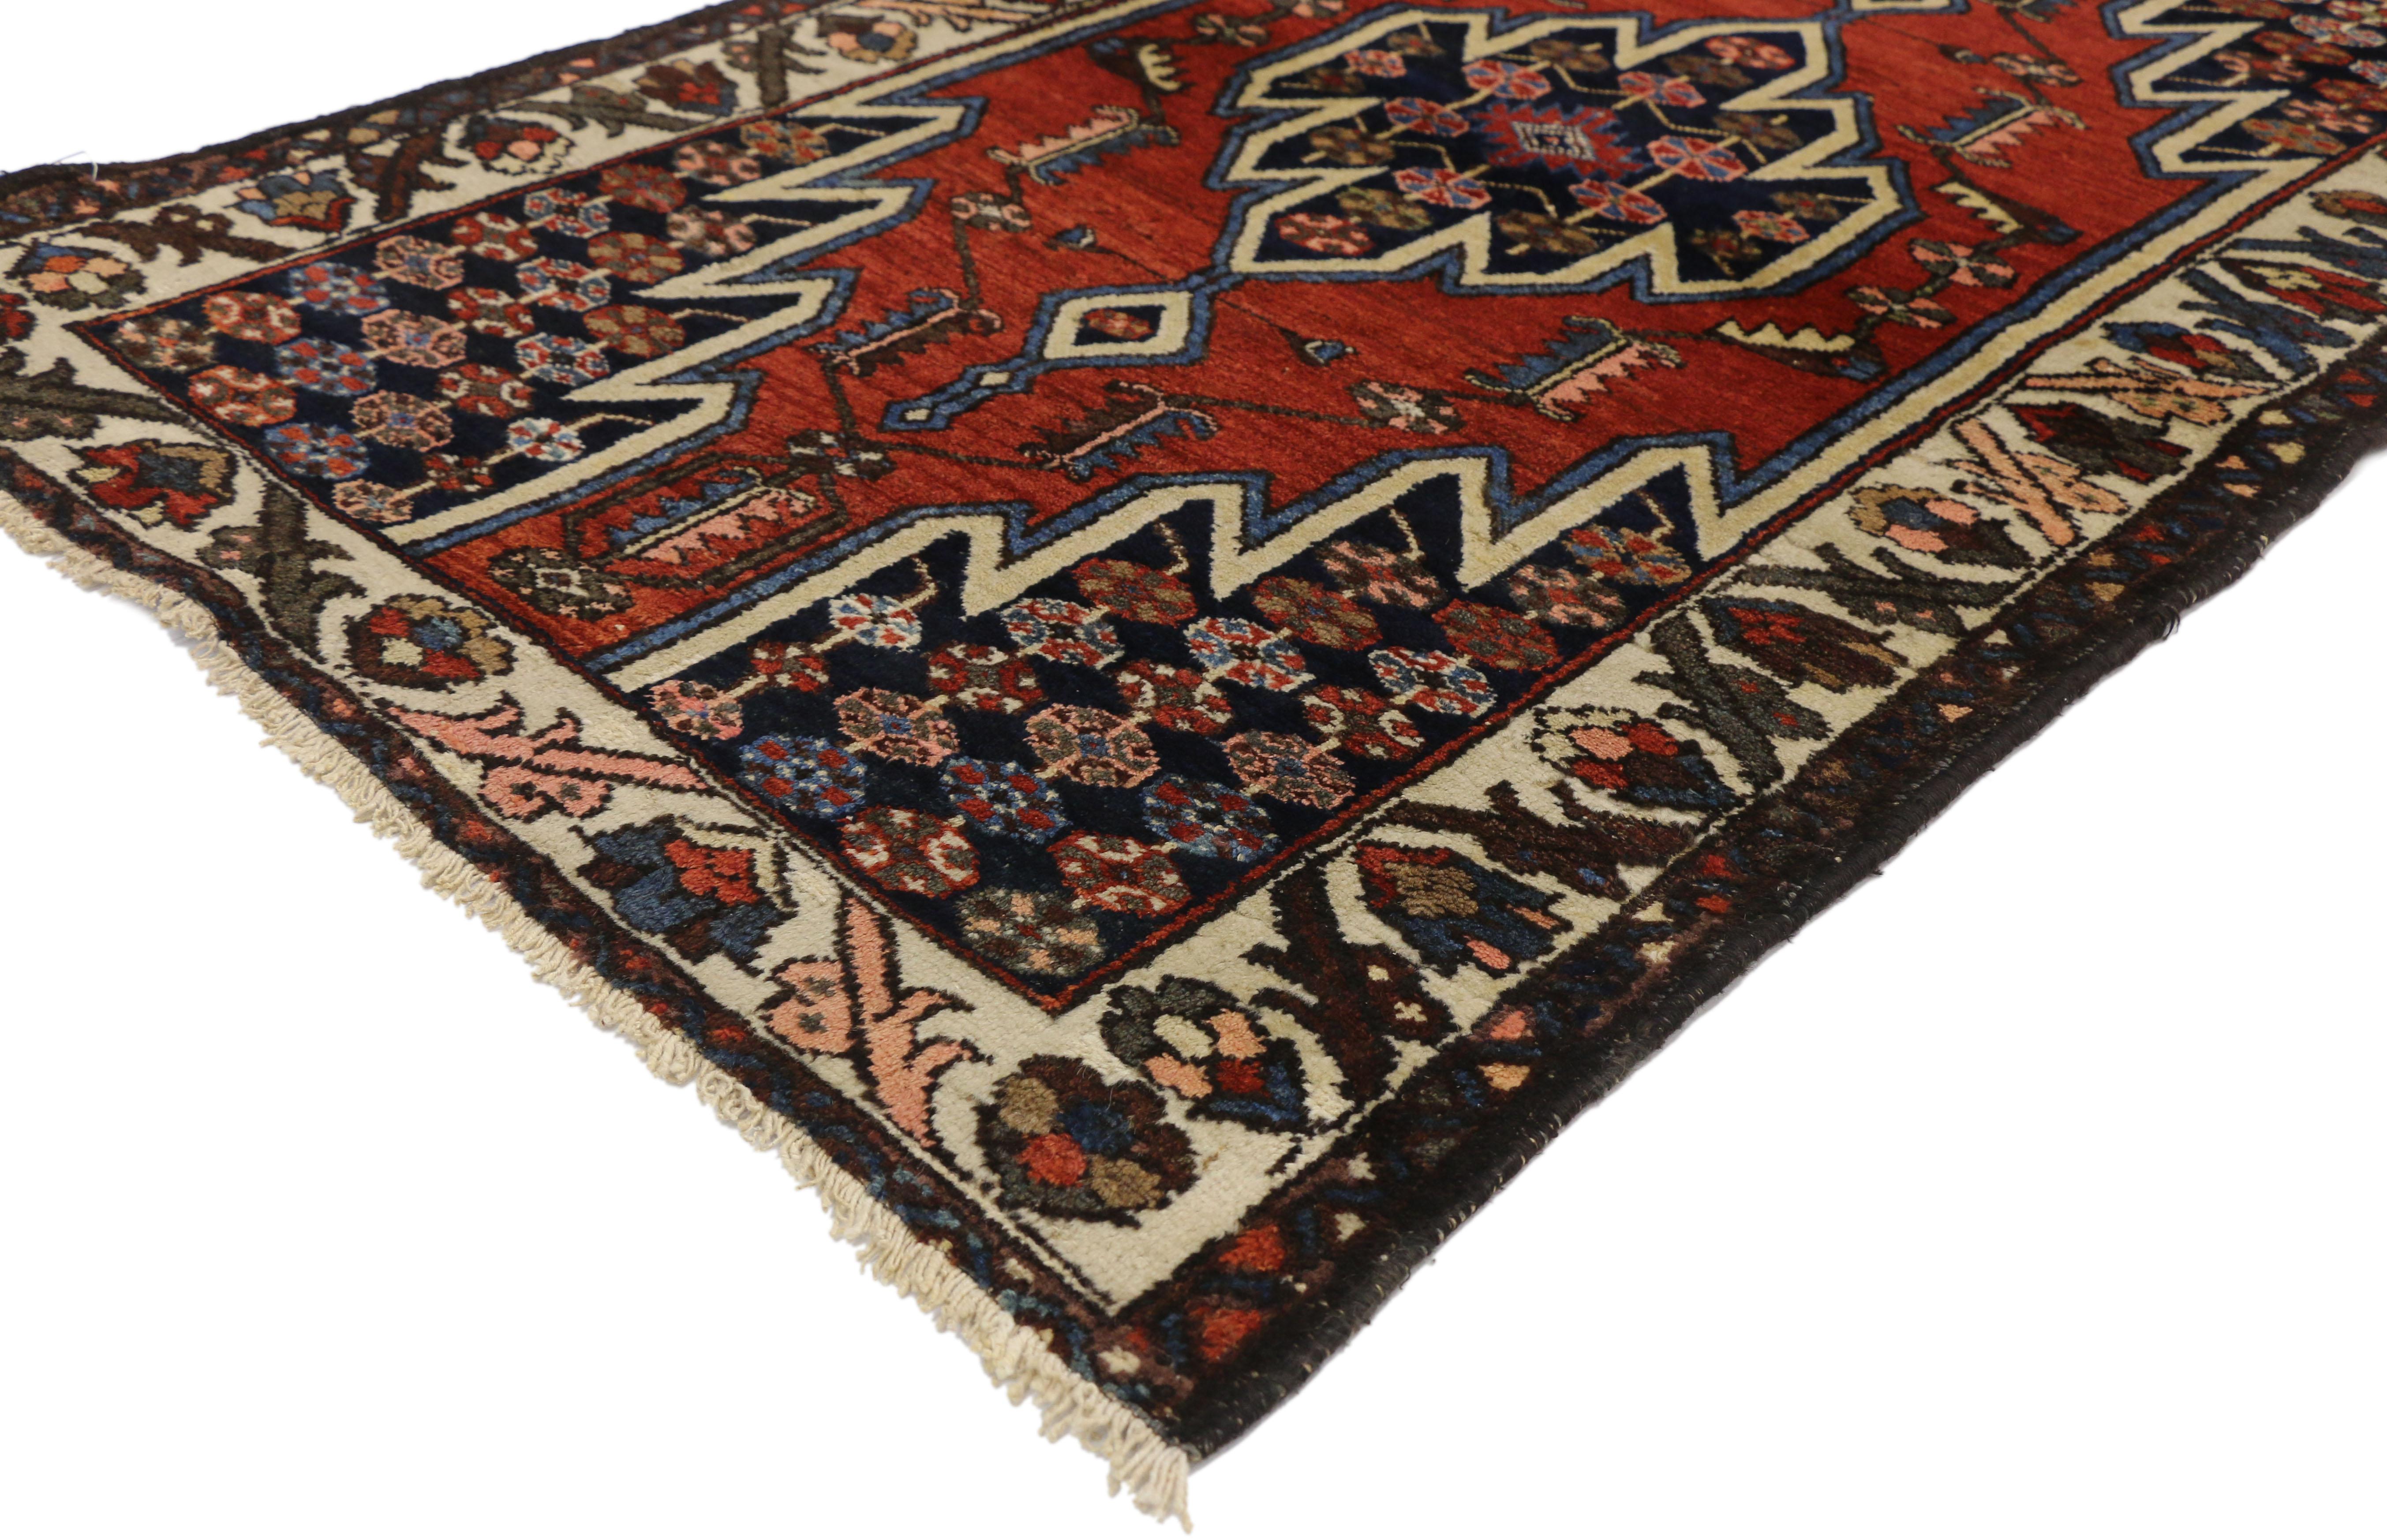 50405 Antique Persian Mazlaghan Hamadan rug with Modern Tribal style. This antique Persian Mazlaghan Hamadan rug with Modern tribal style is characterized by rich colors, bold abstract designs and lavish ornamentation. The smooth texture and tribal